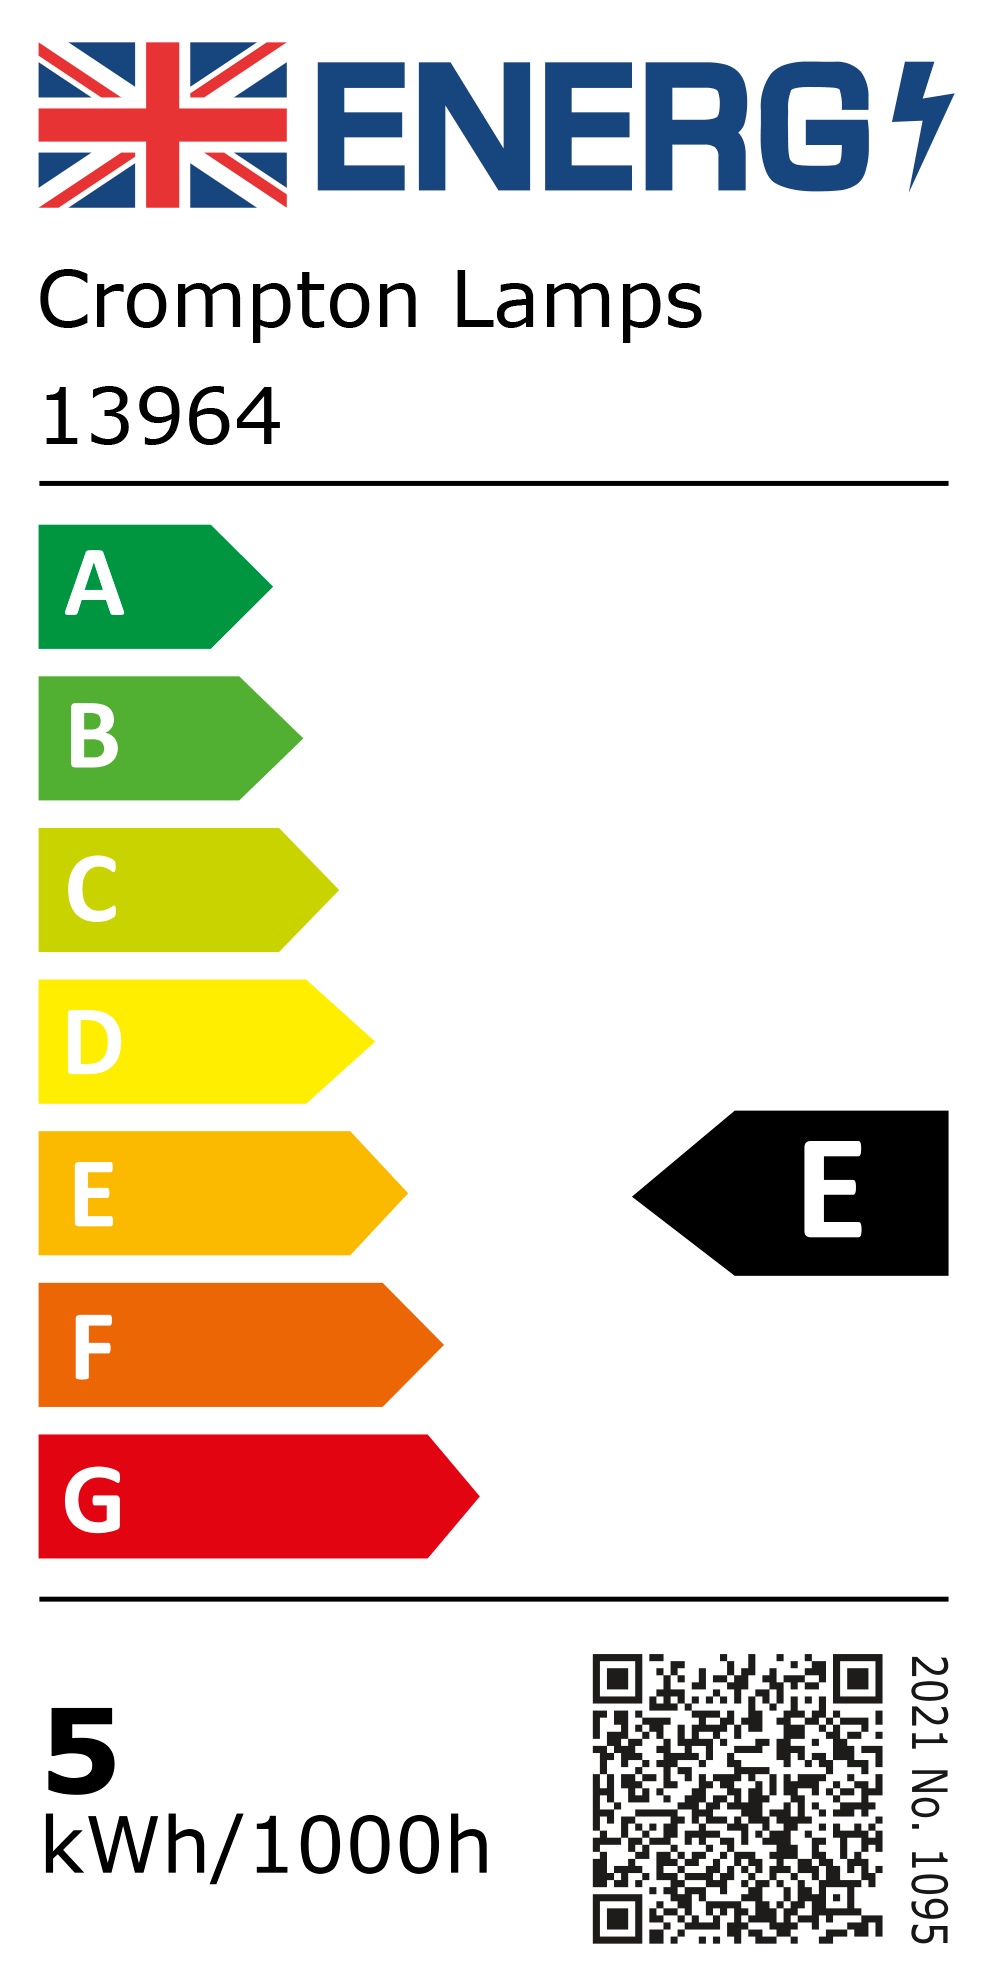 New 2021 Energy Rating Label: Stock Code 13964